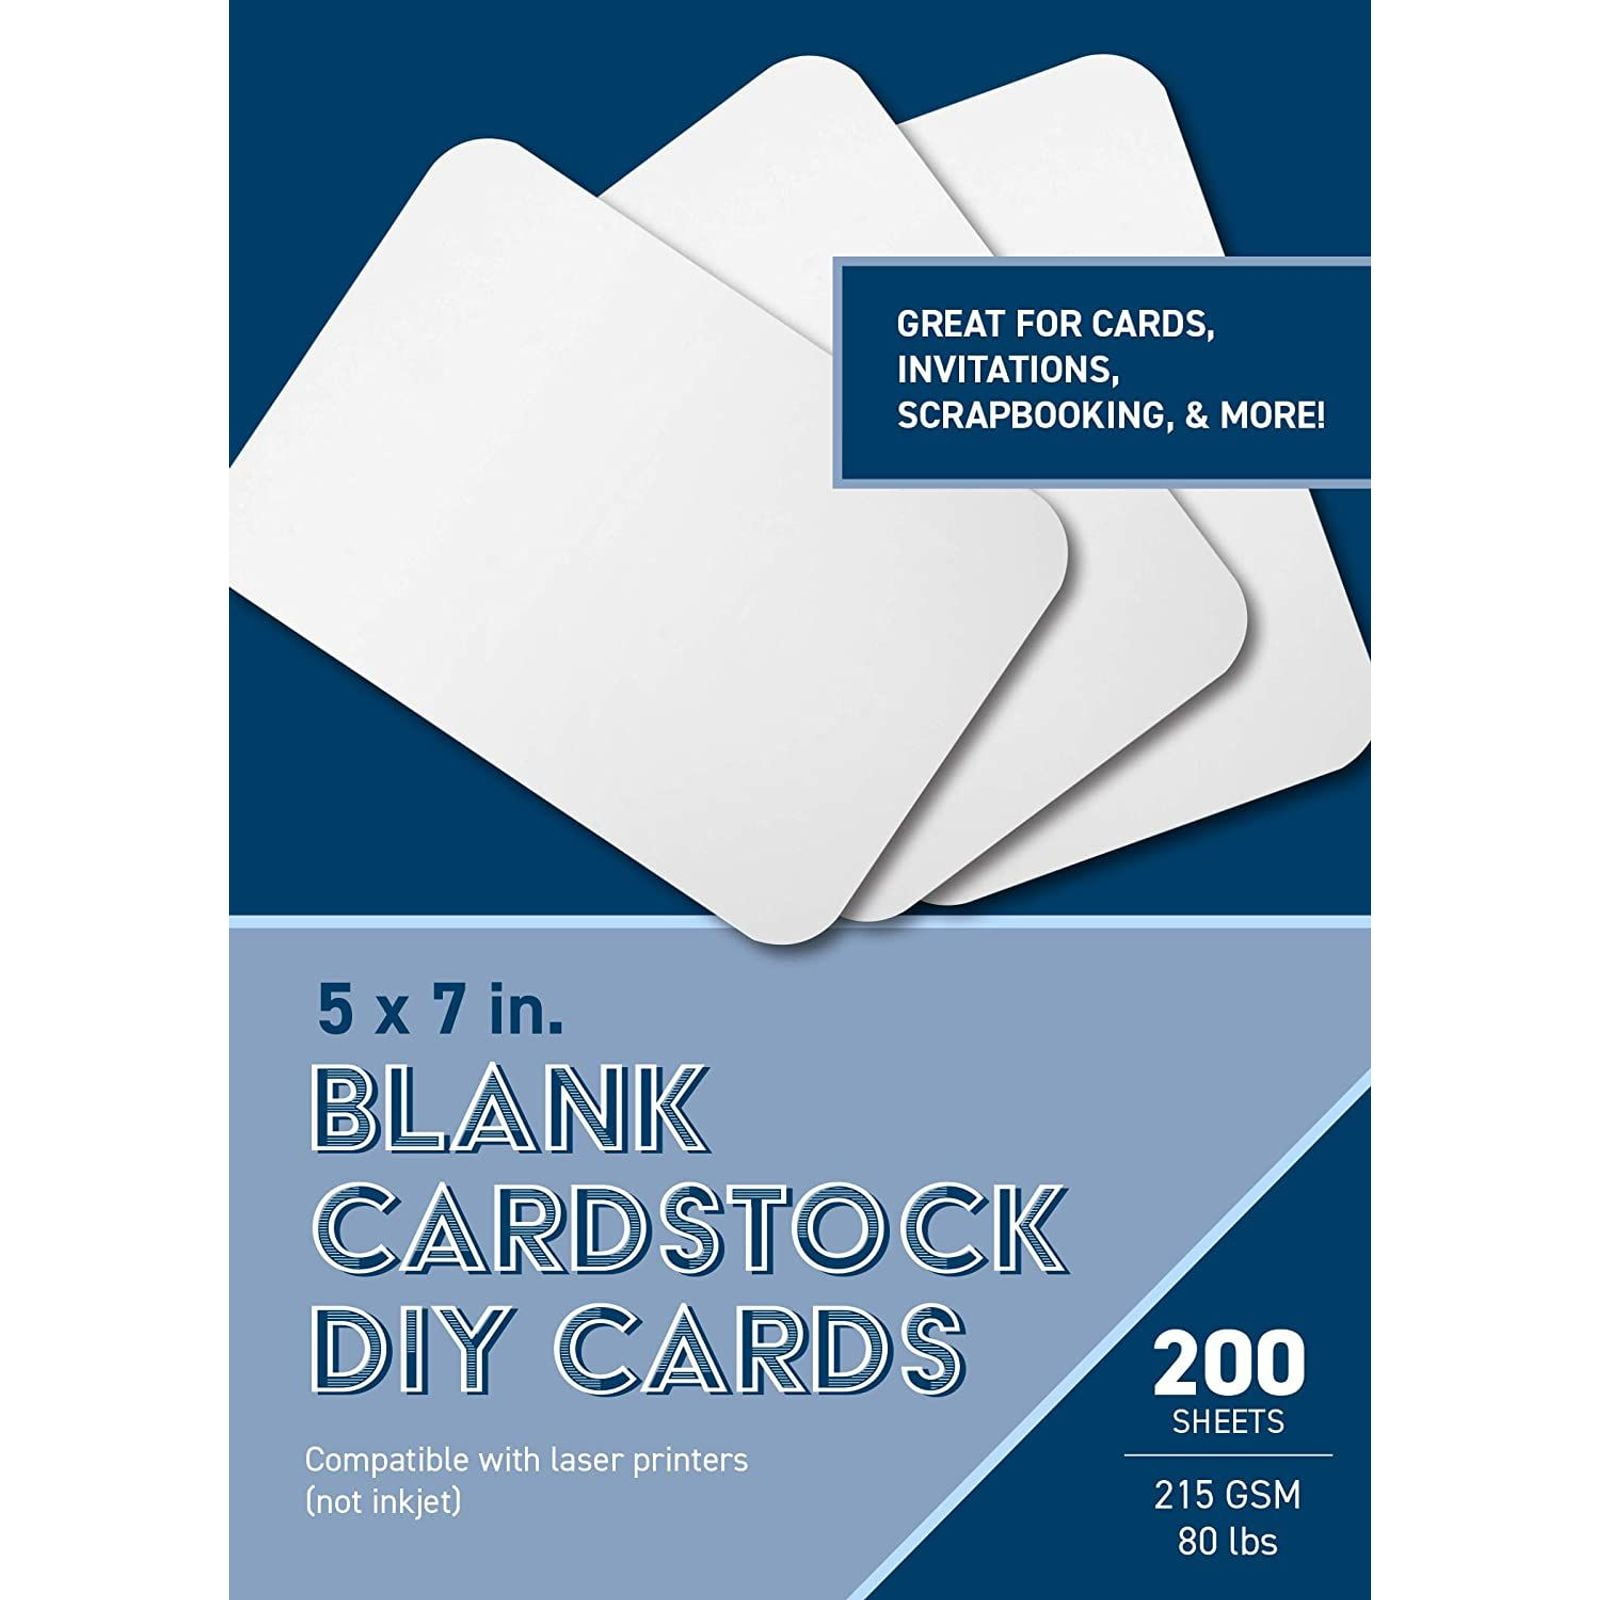 Recollections Cardstock Paper, Essentials 20 Colors - 200 Sheets 8-1/2 x 11